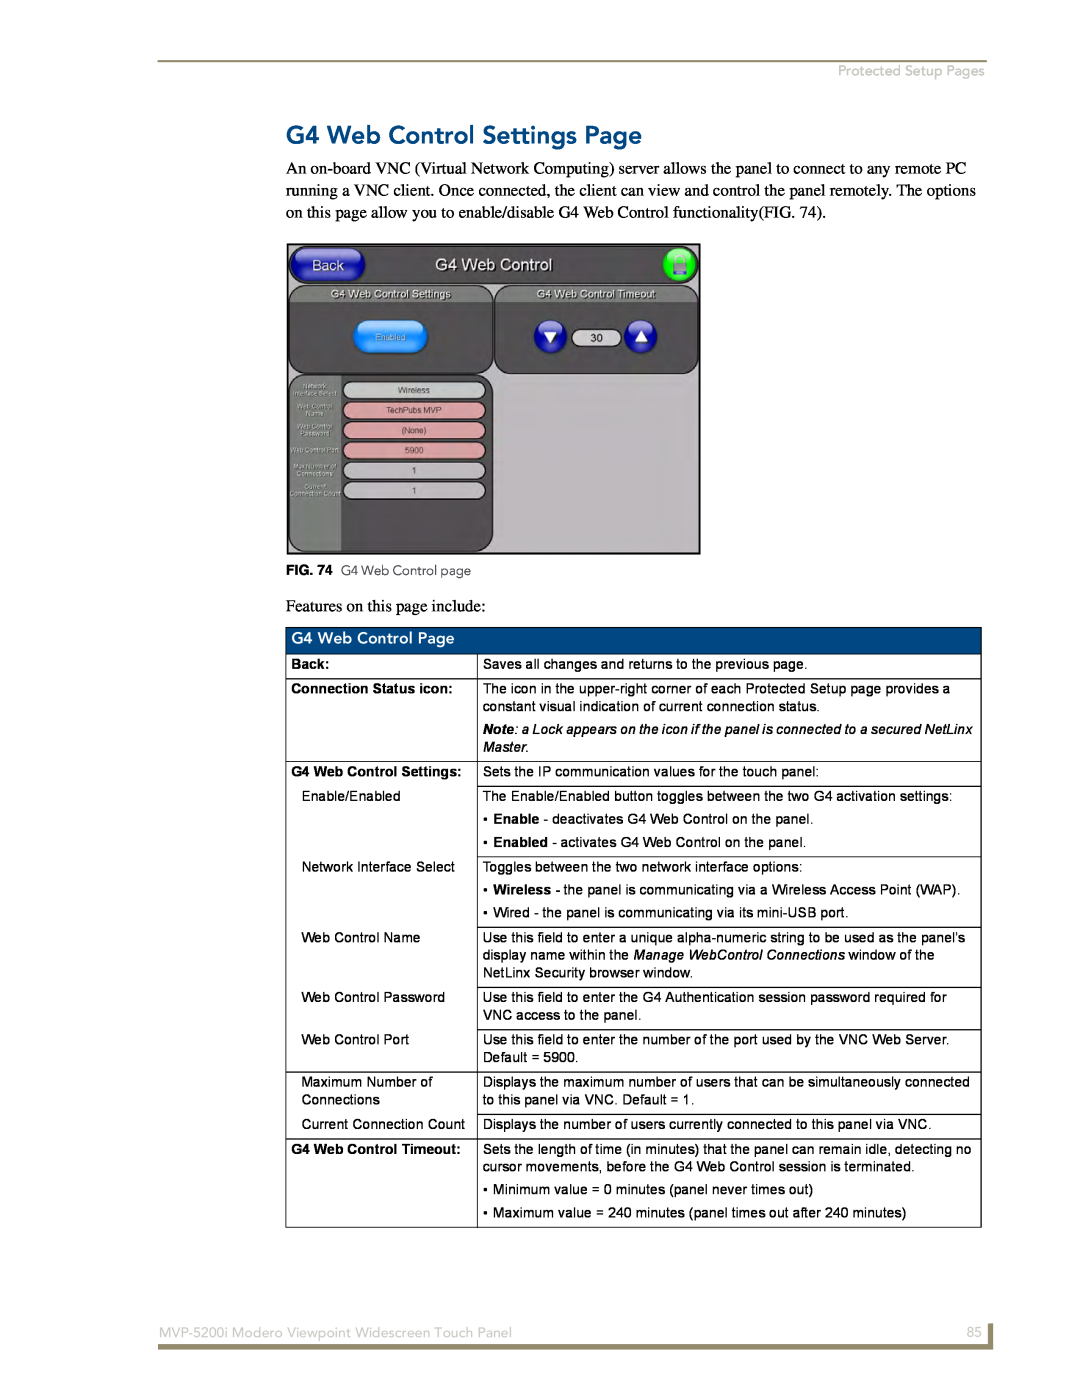 AMX MVP-5200i manual G4 Web Control Settings Page, G4 Web Control Page, Protected Setup Pages, Master 